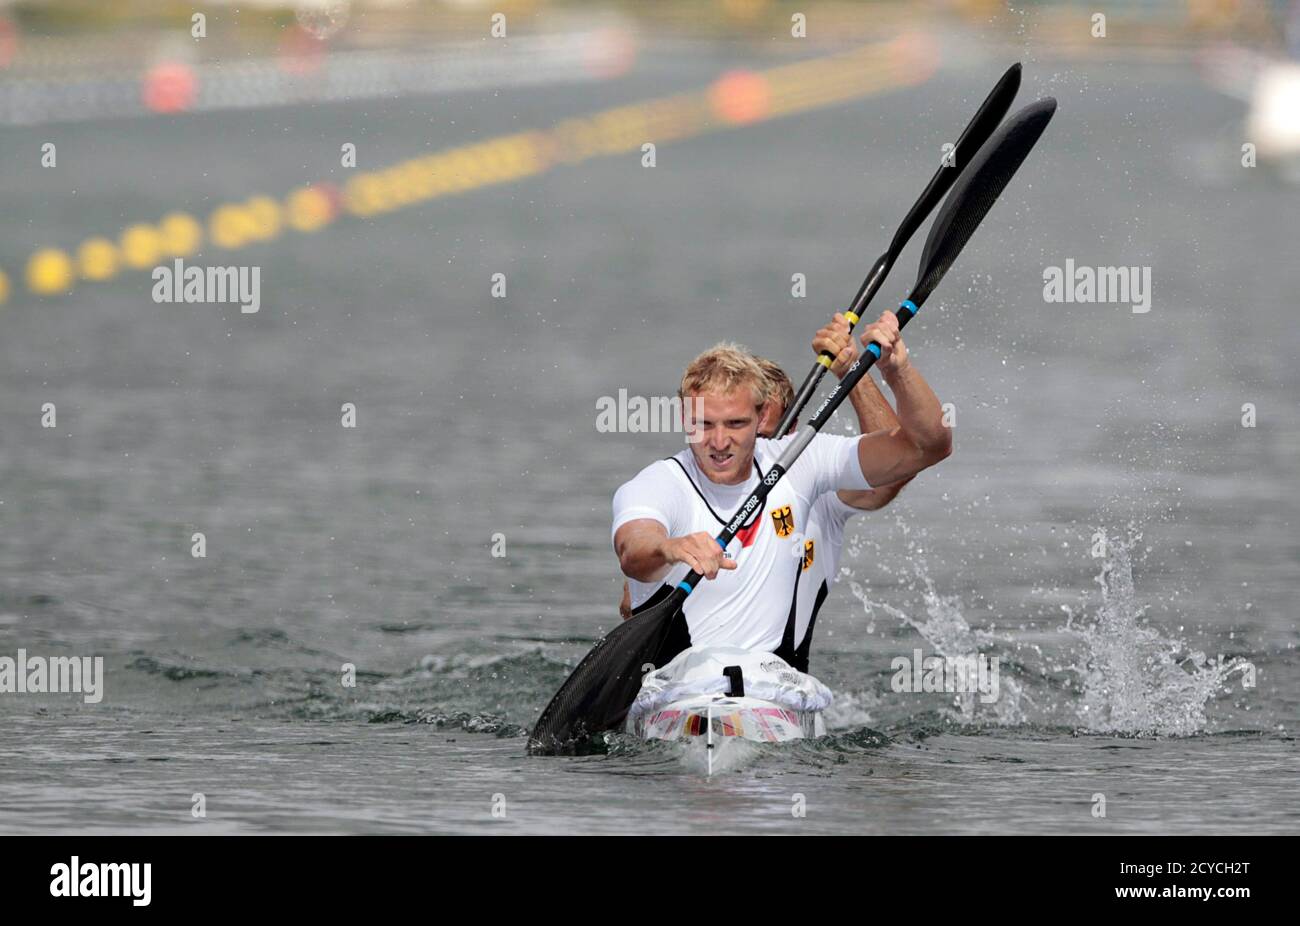 Germany's Martin Hollstein and Andreas Ihle compete in the men's kayak  double (K2) 1000m heat at the Eton Dorney during the London 2012 Olympic  Games August 6, 2012. REUTERS/Darren Whiteside (BRITAIN -